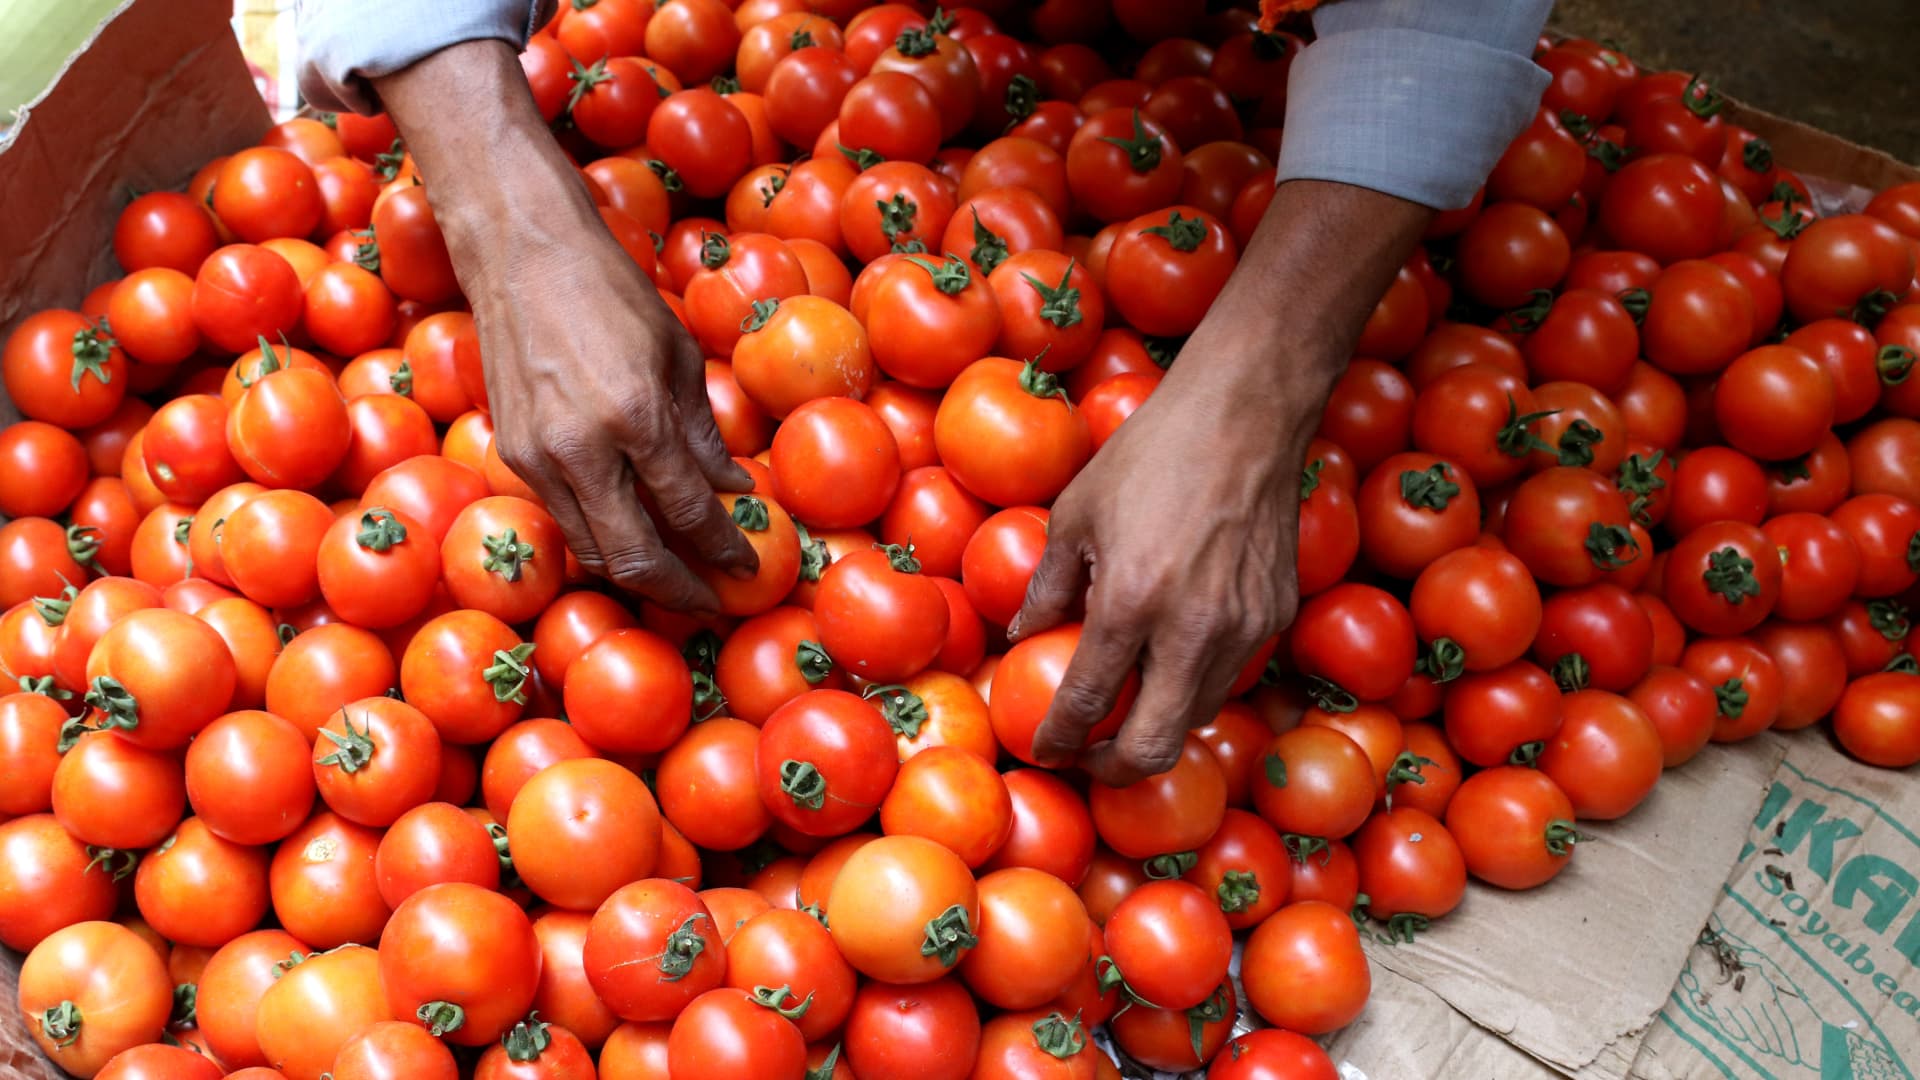 India’s tomato costs surge over 300%, sparking theft and turmoil